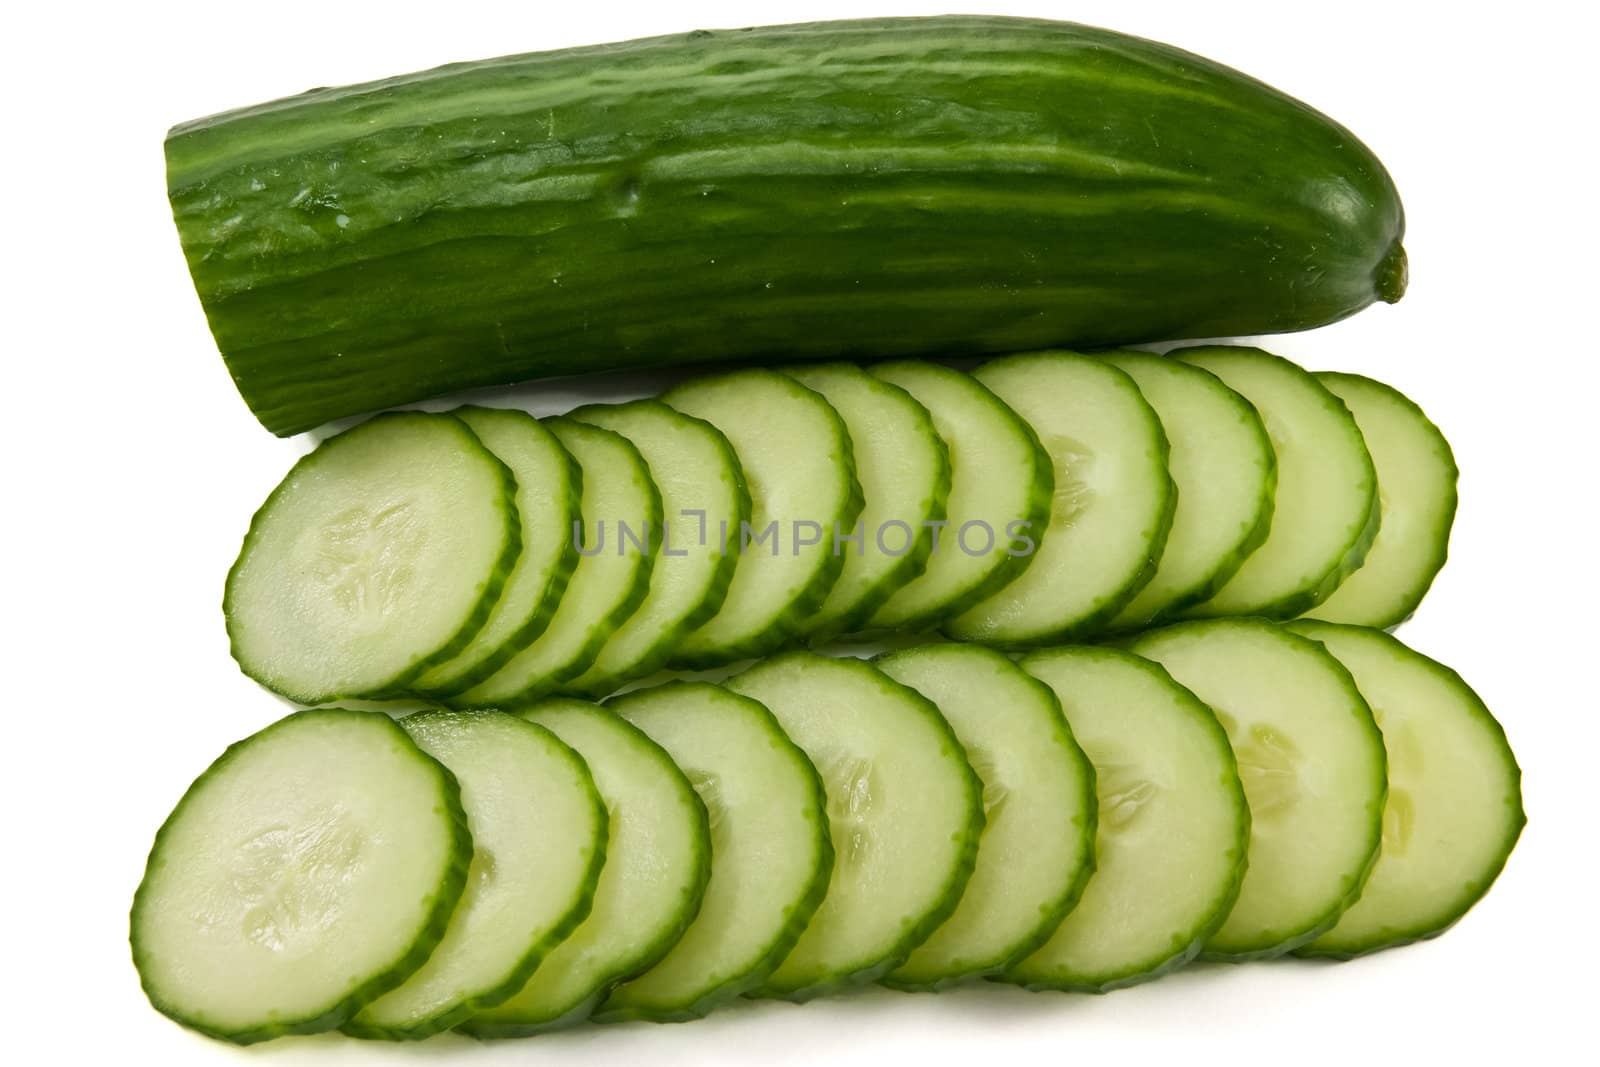 Cucumber sliced lines by Stootsy